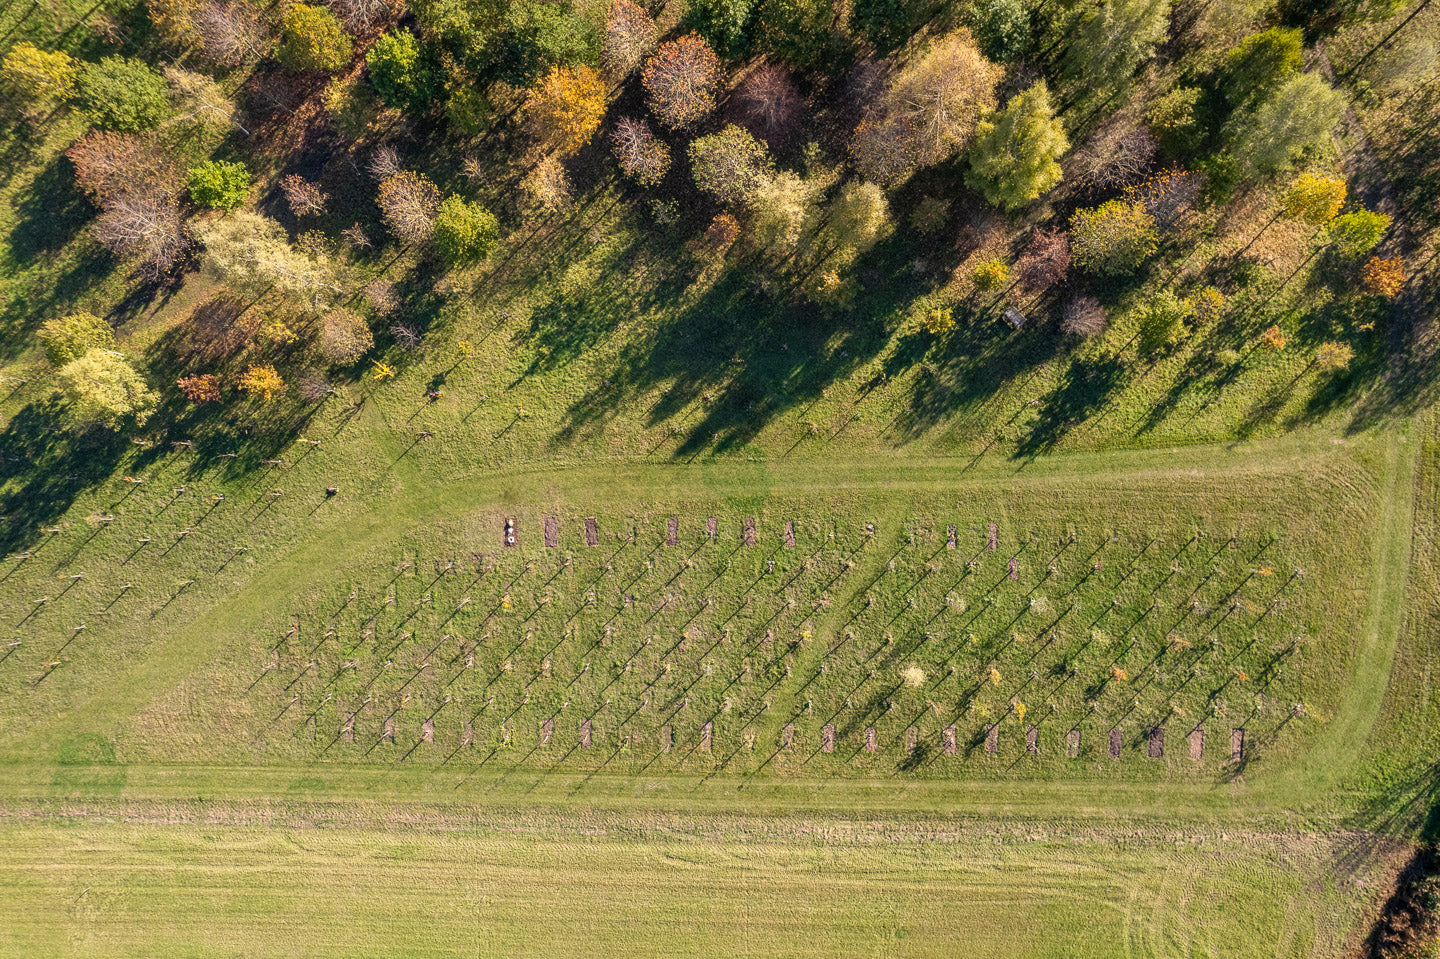 natural burial ground from birds eye view